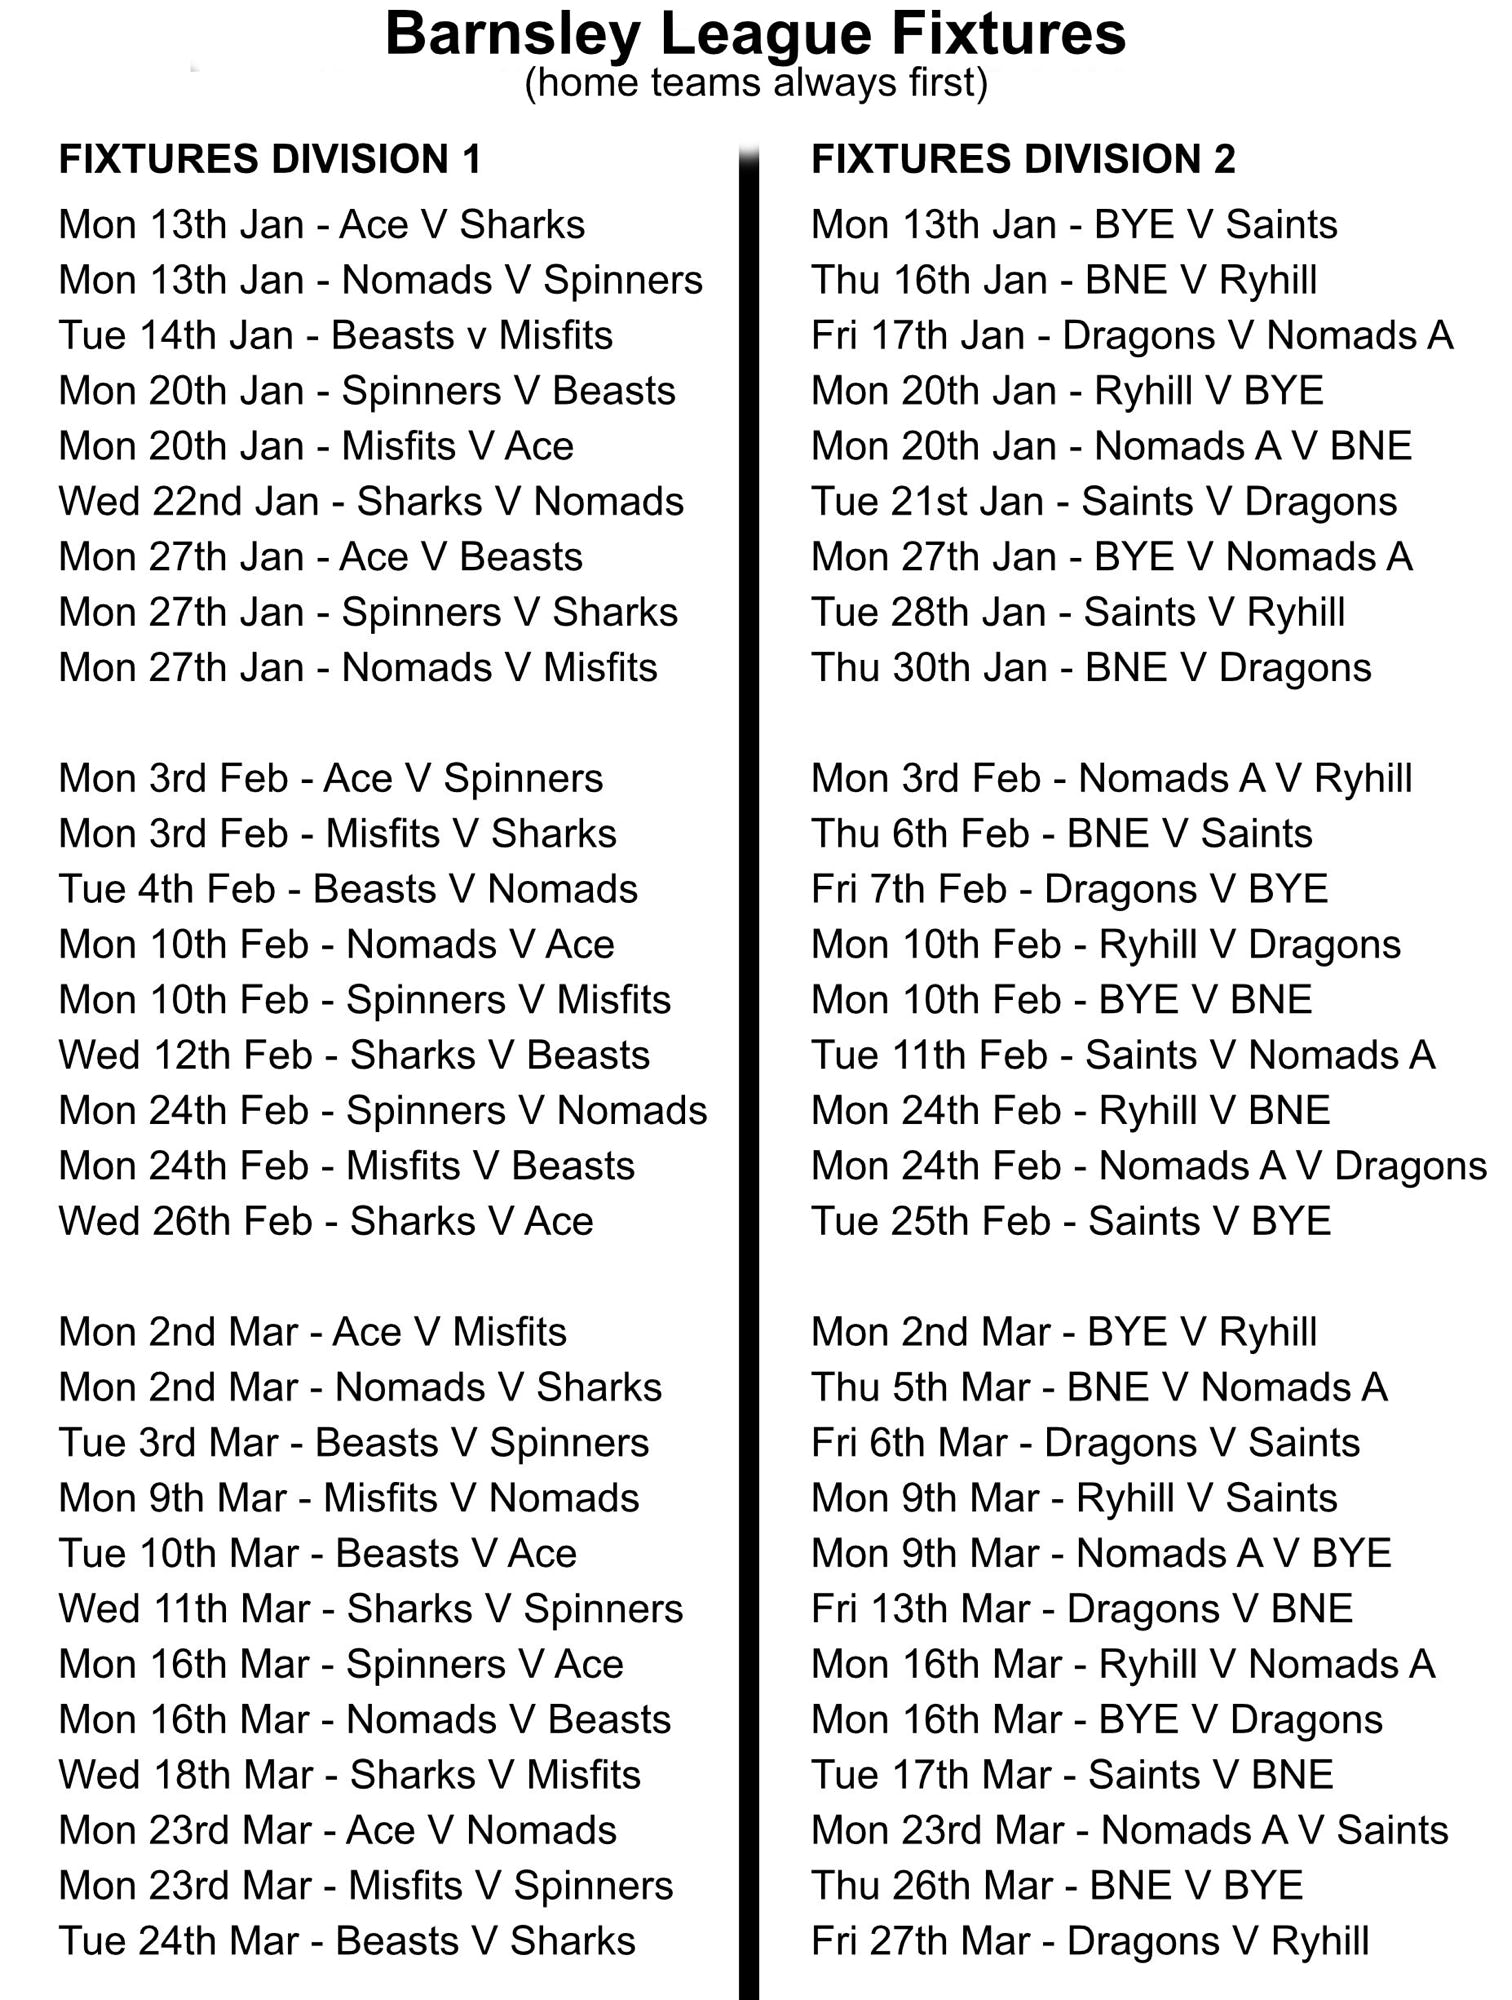 A list of Barnsley table tennis fixtures for the current year